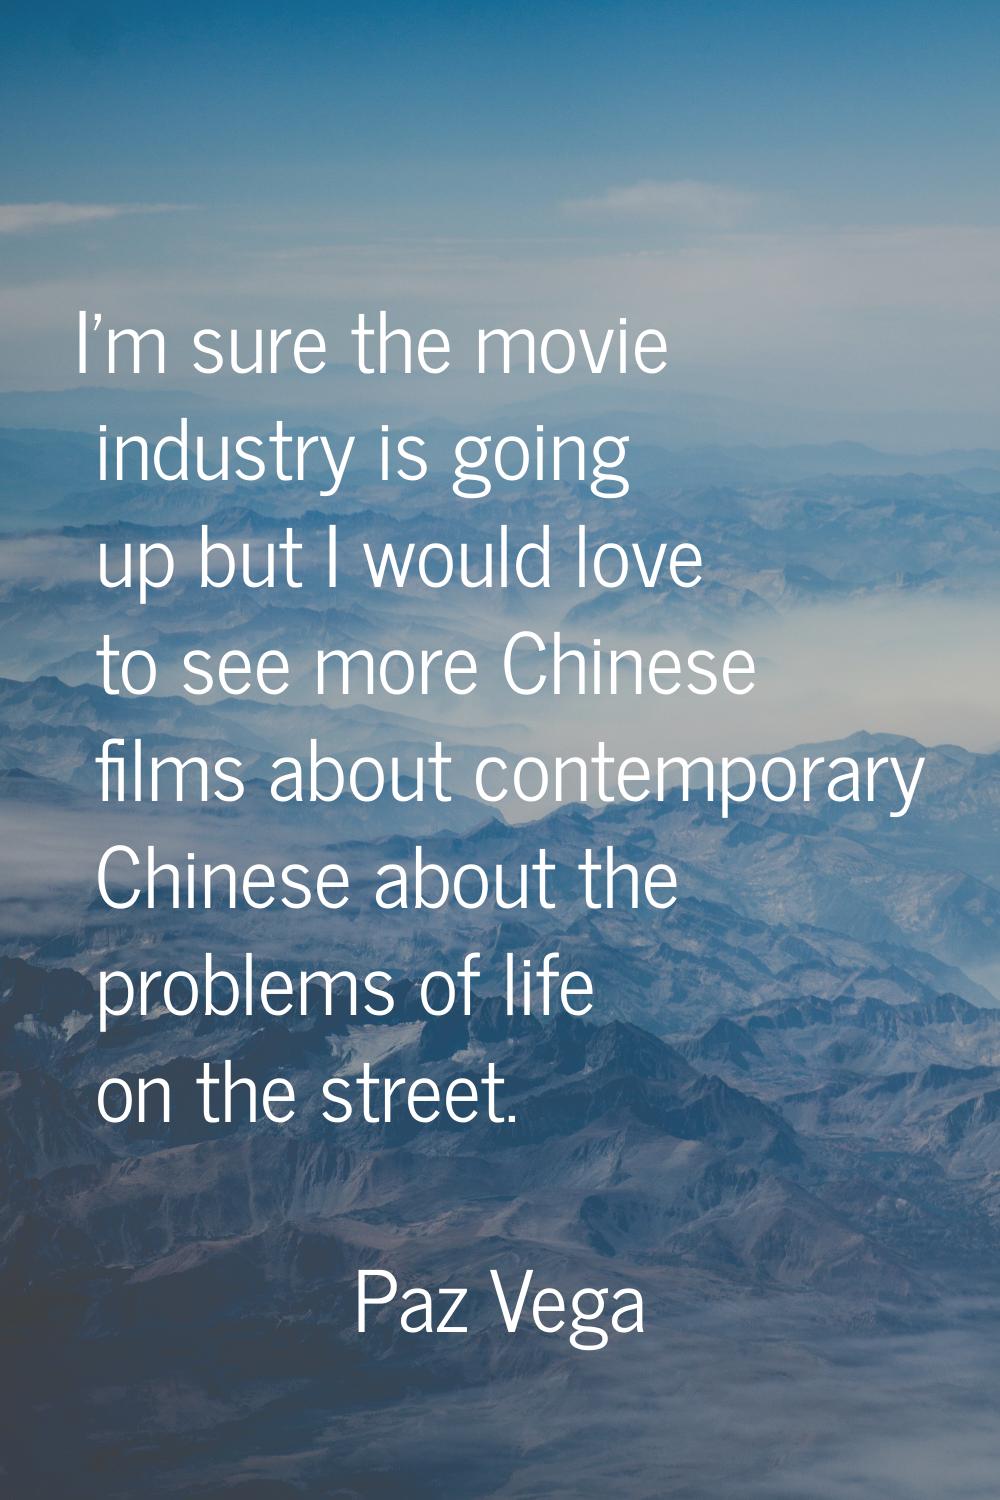 I'm sure the movie industry is going up but I would love to see more Chinese films about contempora